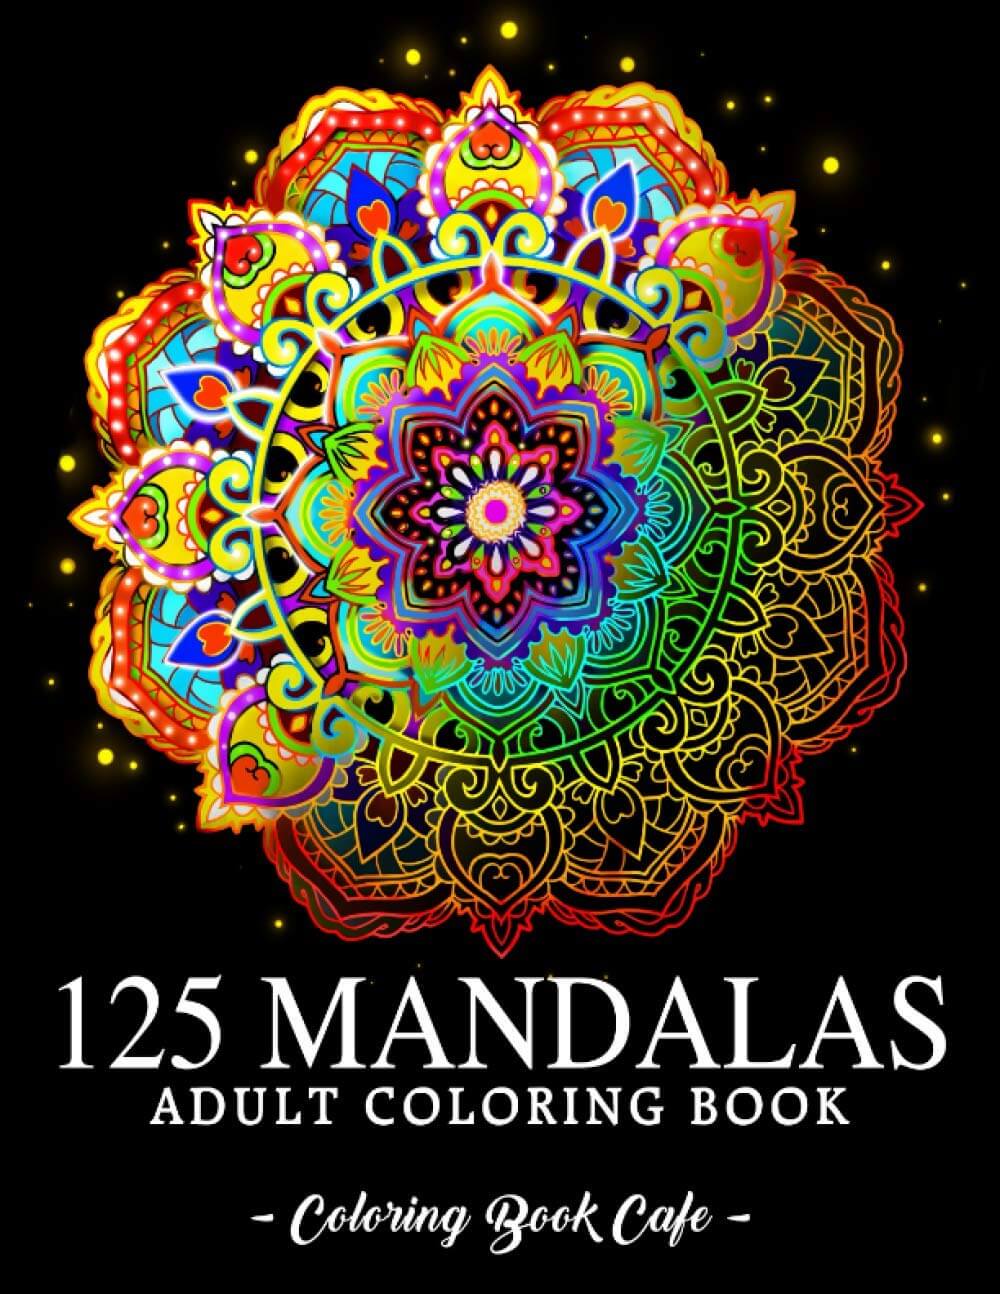 back book cover with colorful mandalas